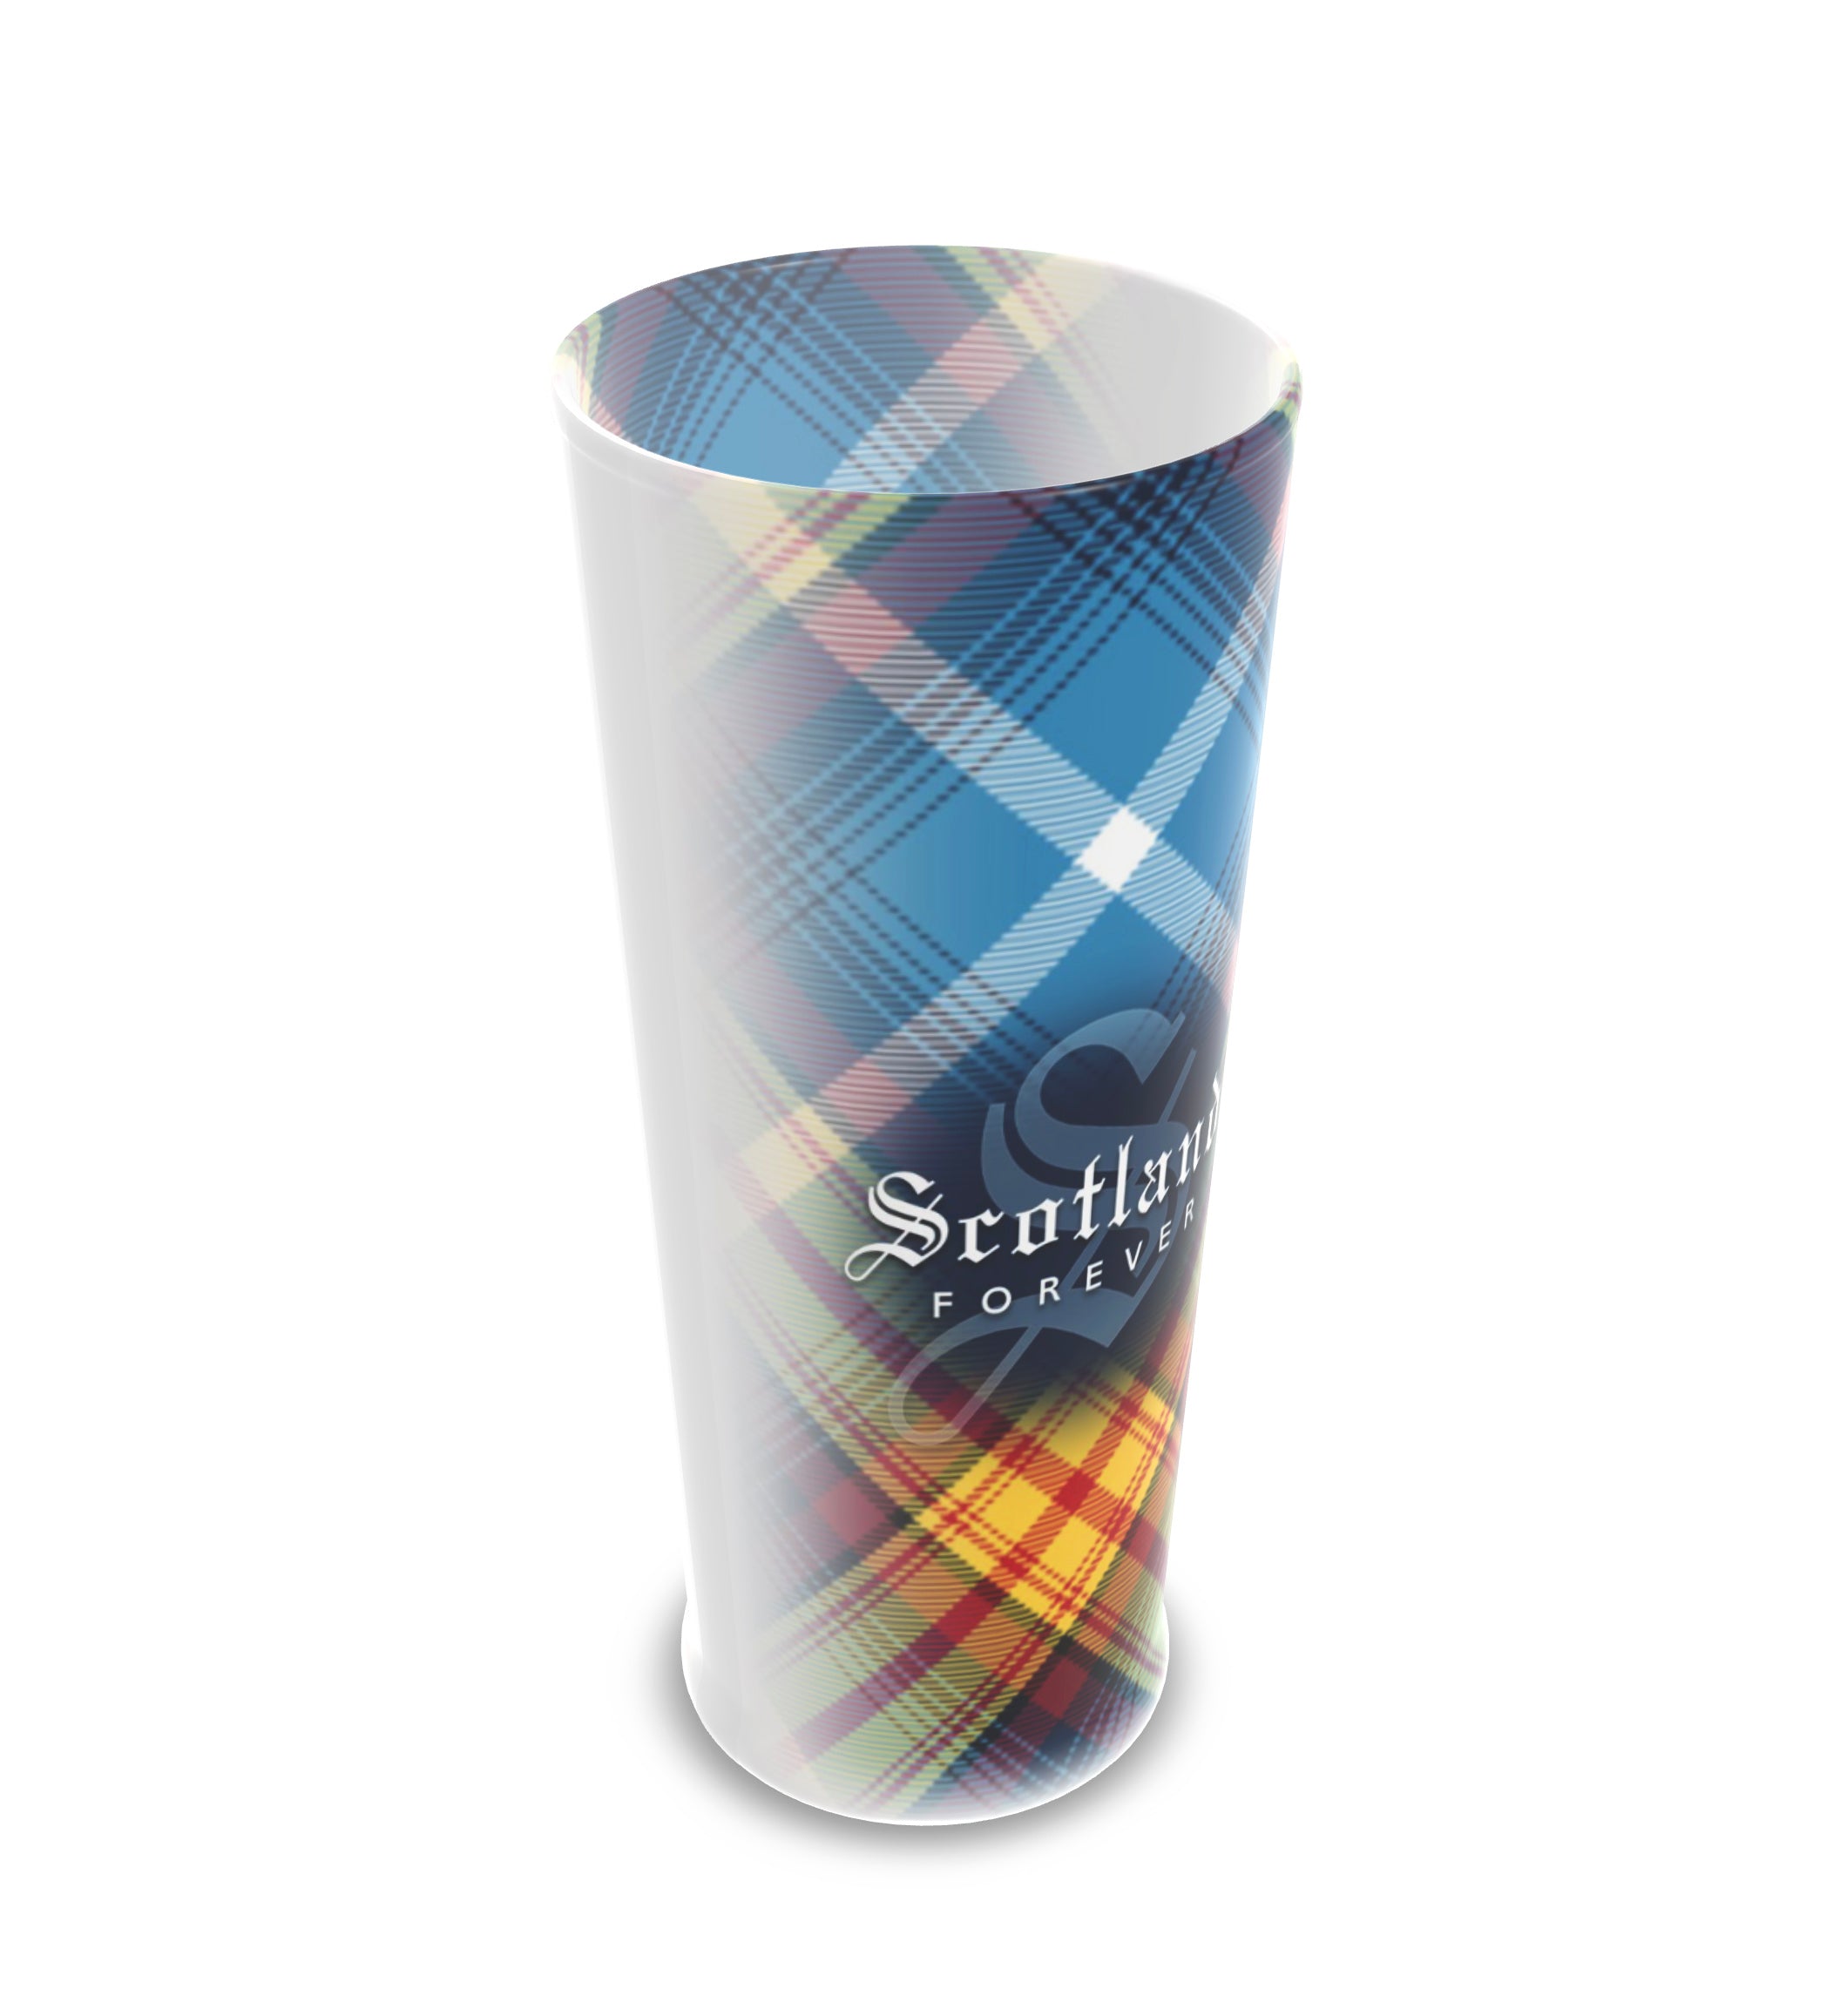 Scotland Forever - Declaration Tartan - Glossy Beer Glass - semi-transparent, letting your beer show